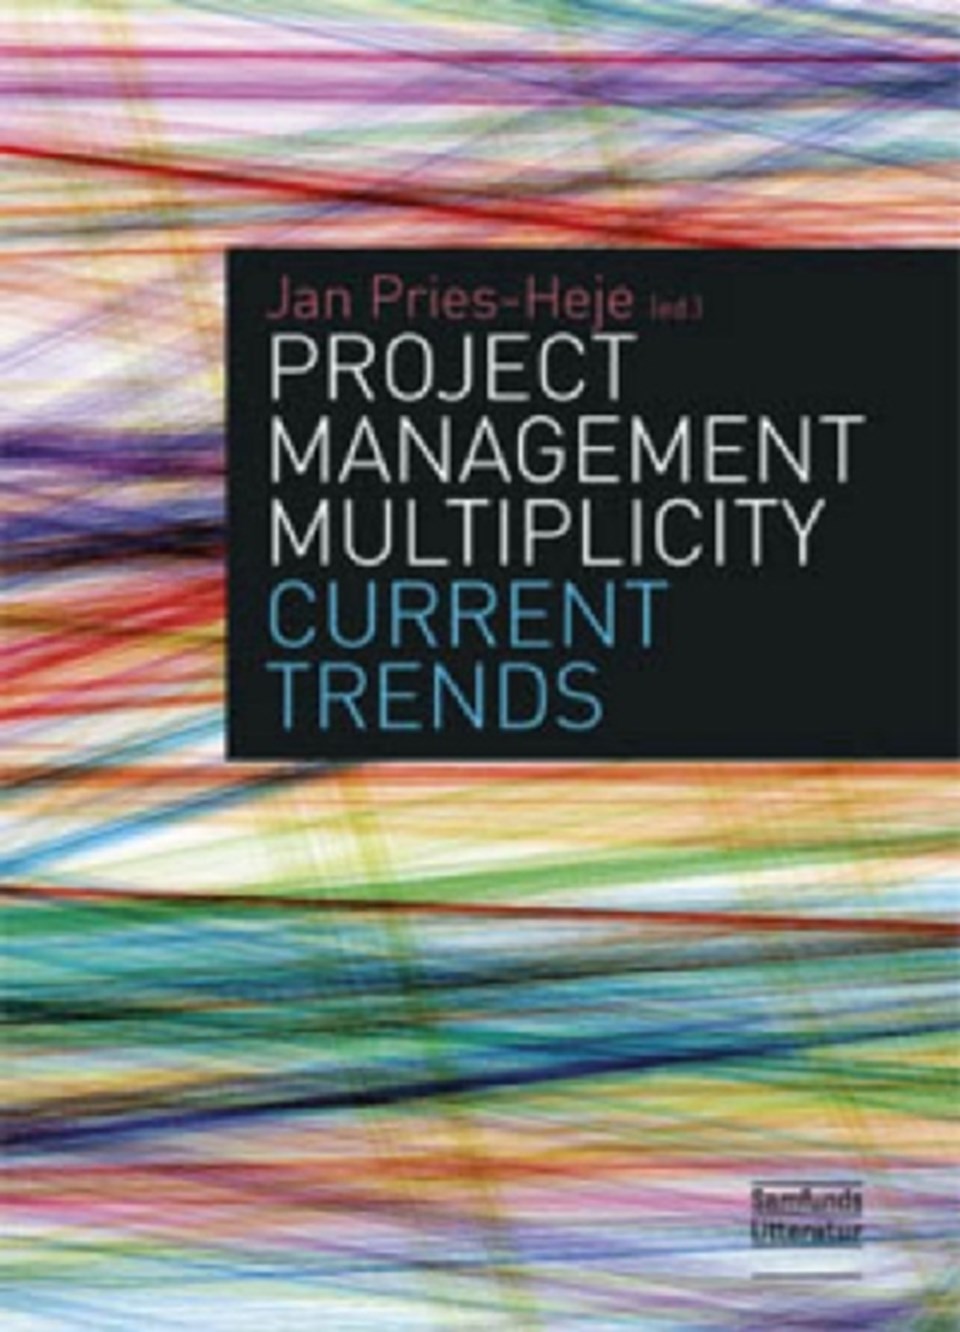 Project Management Multiplicity